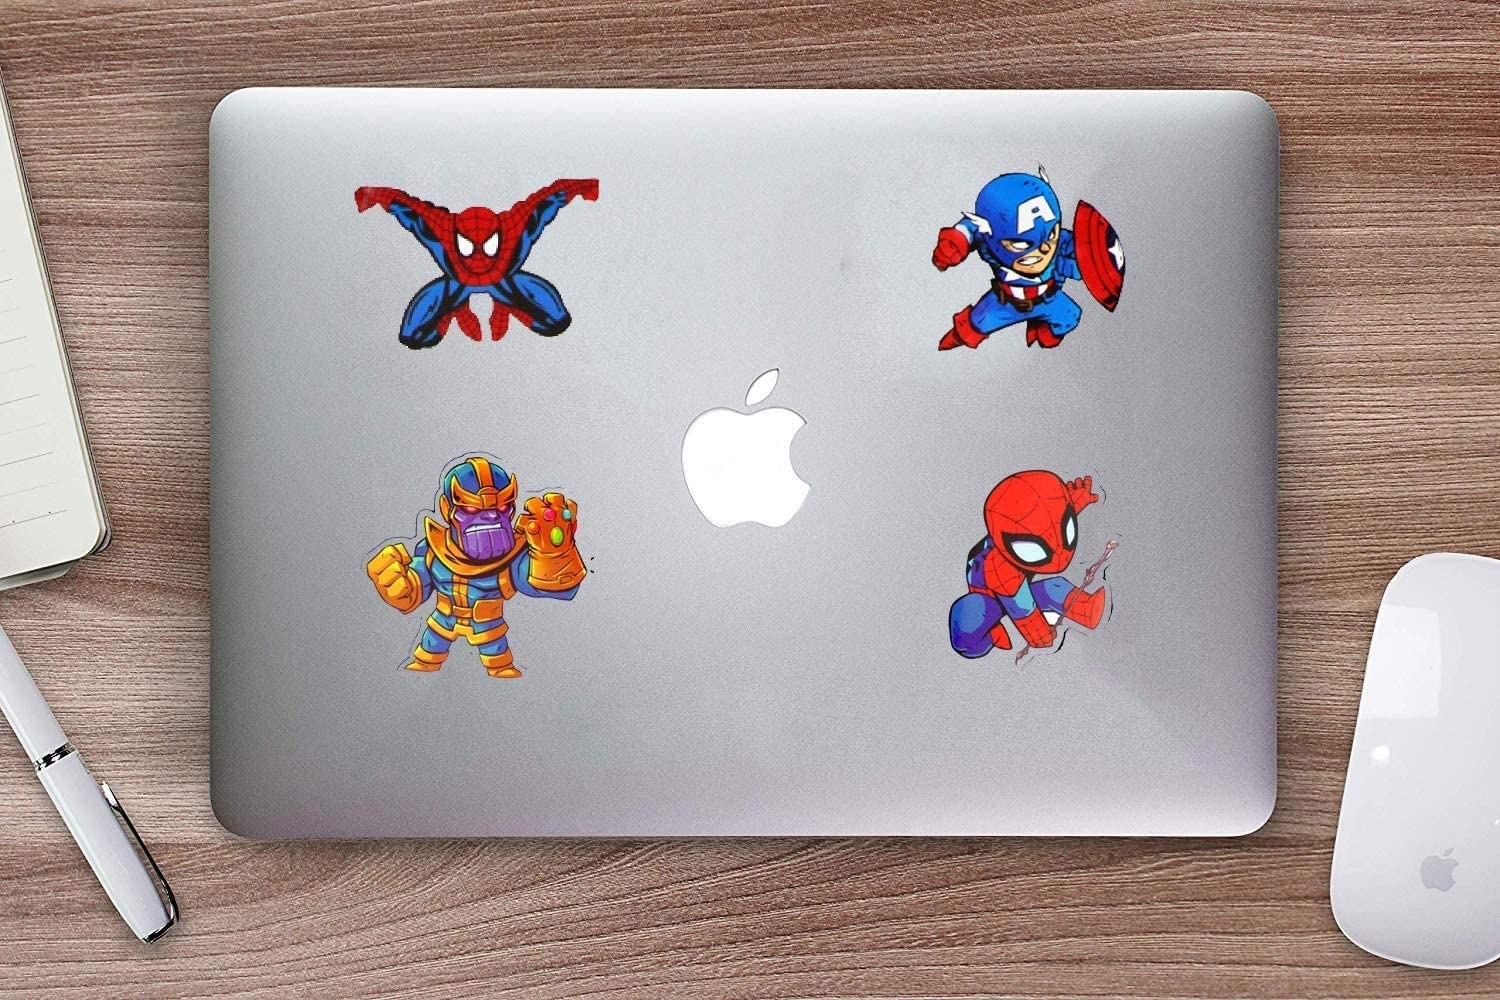 Four stickers on a laptop